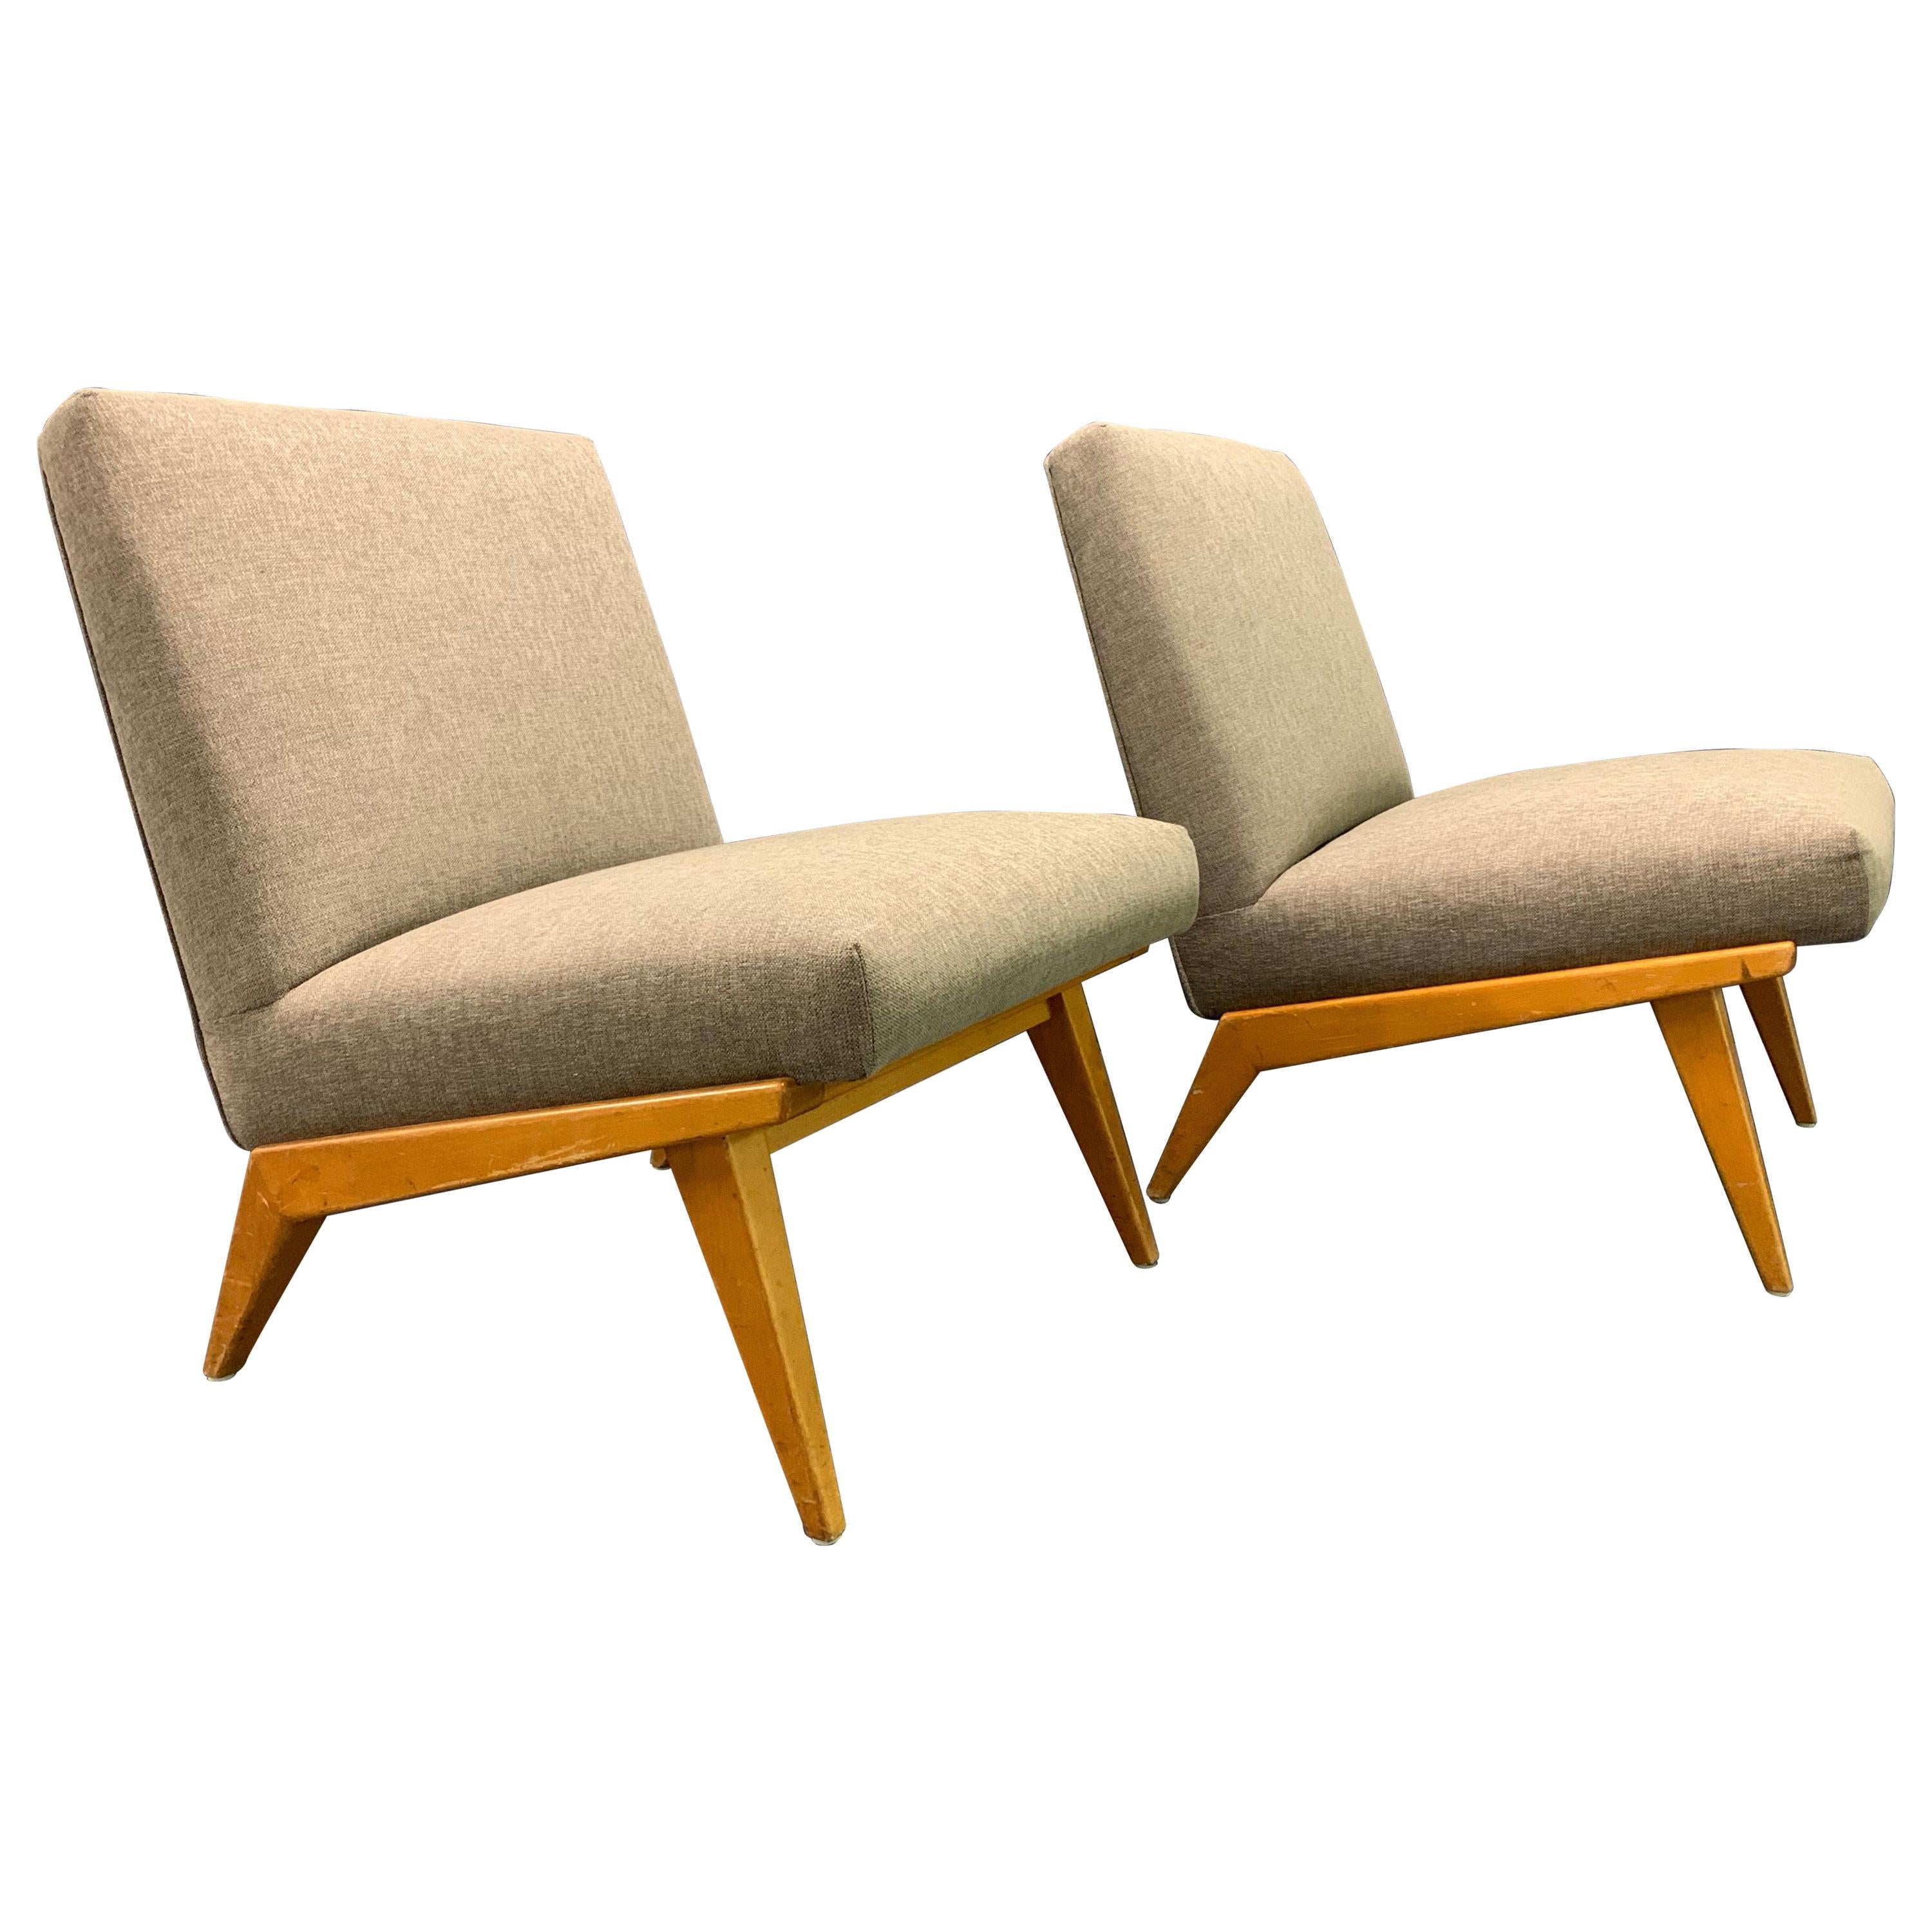 Rare Set of Two No.21 Lounge Chairs by Jens Risom for Knoll